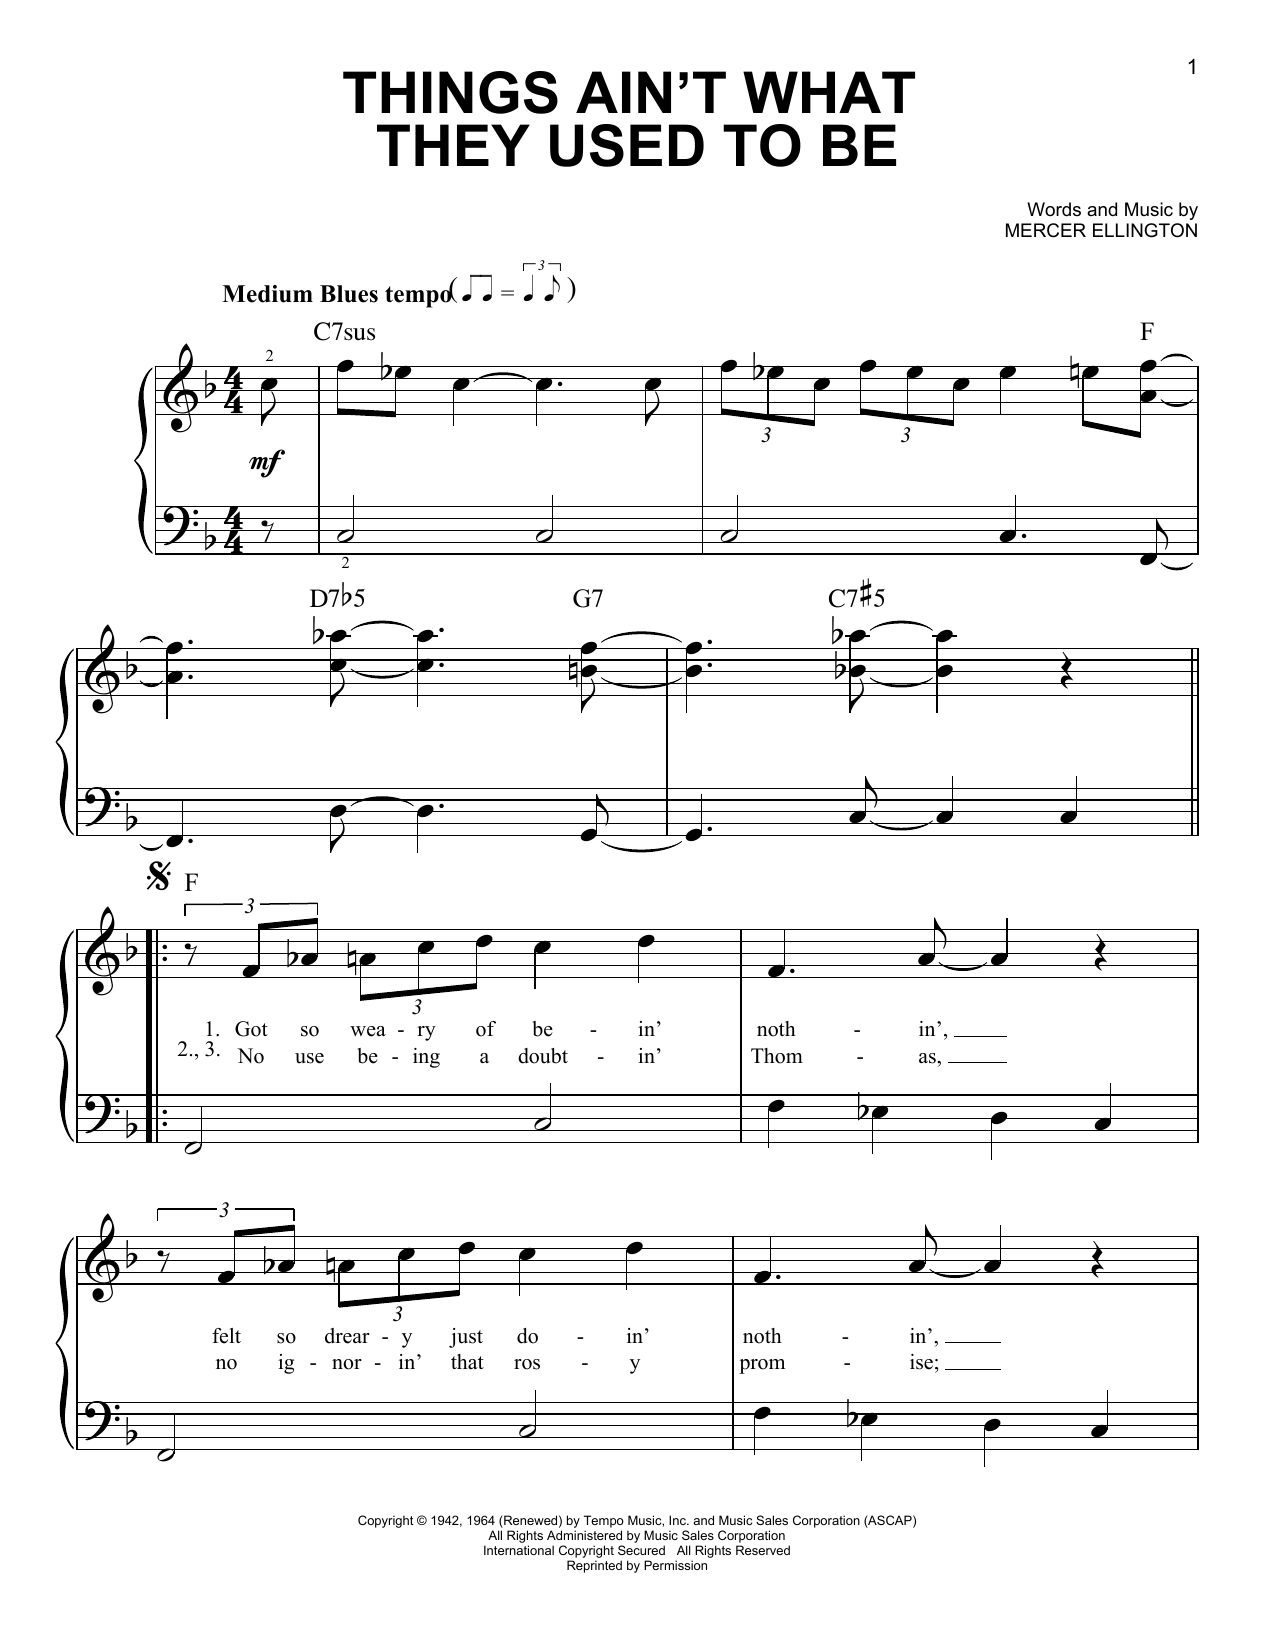 Download Duke Ellington Things Ain't What They Used To Be Sheet Music